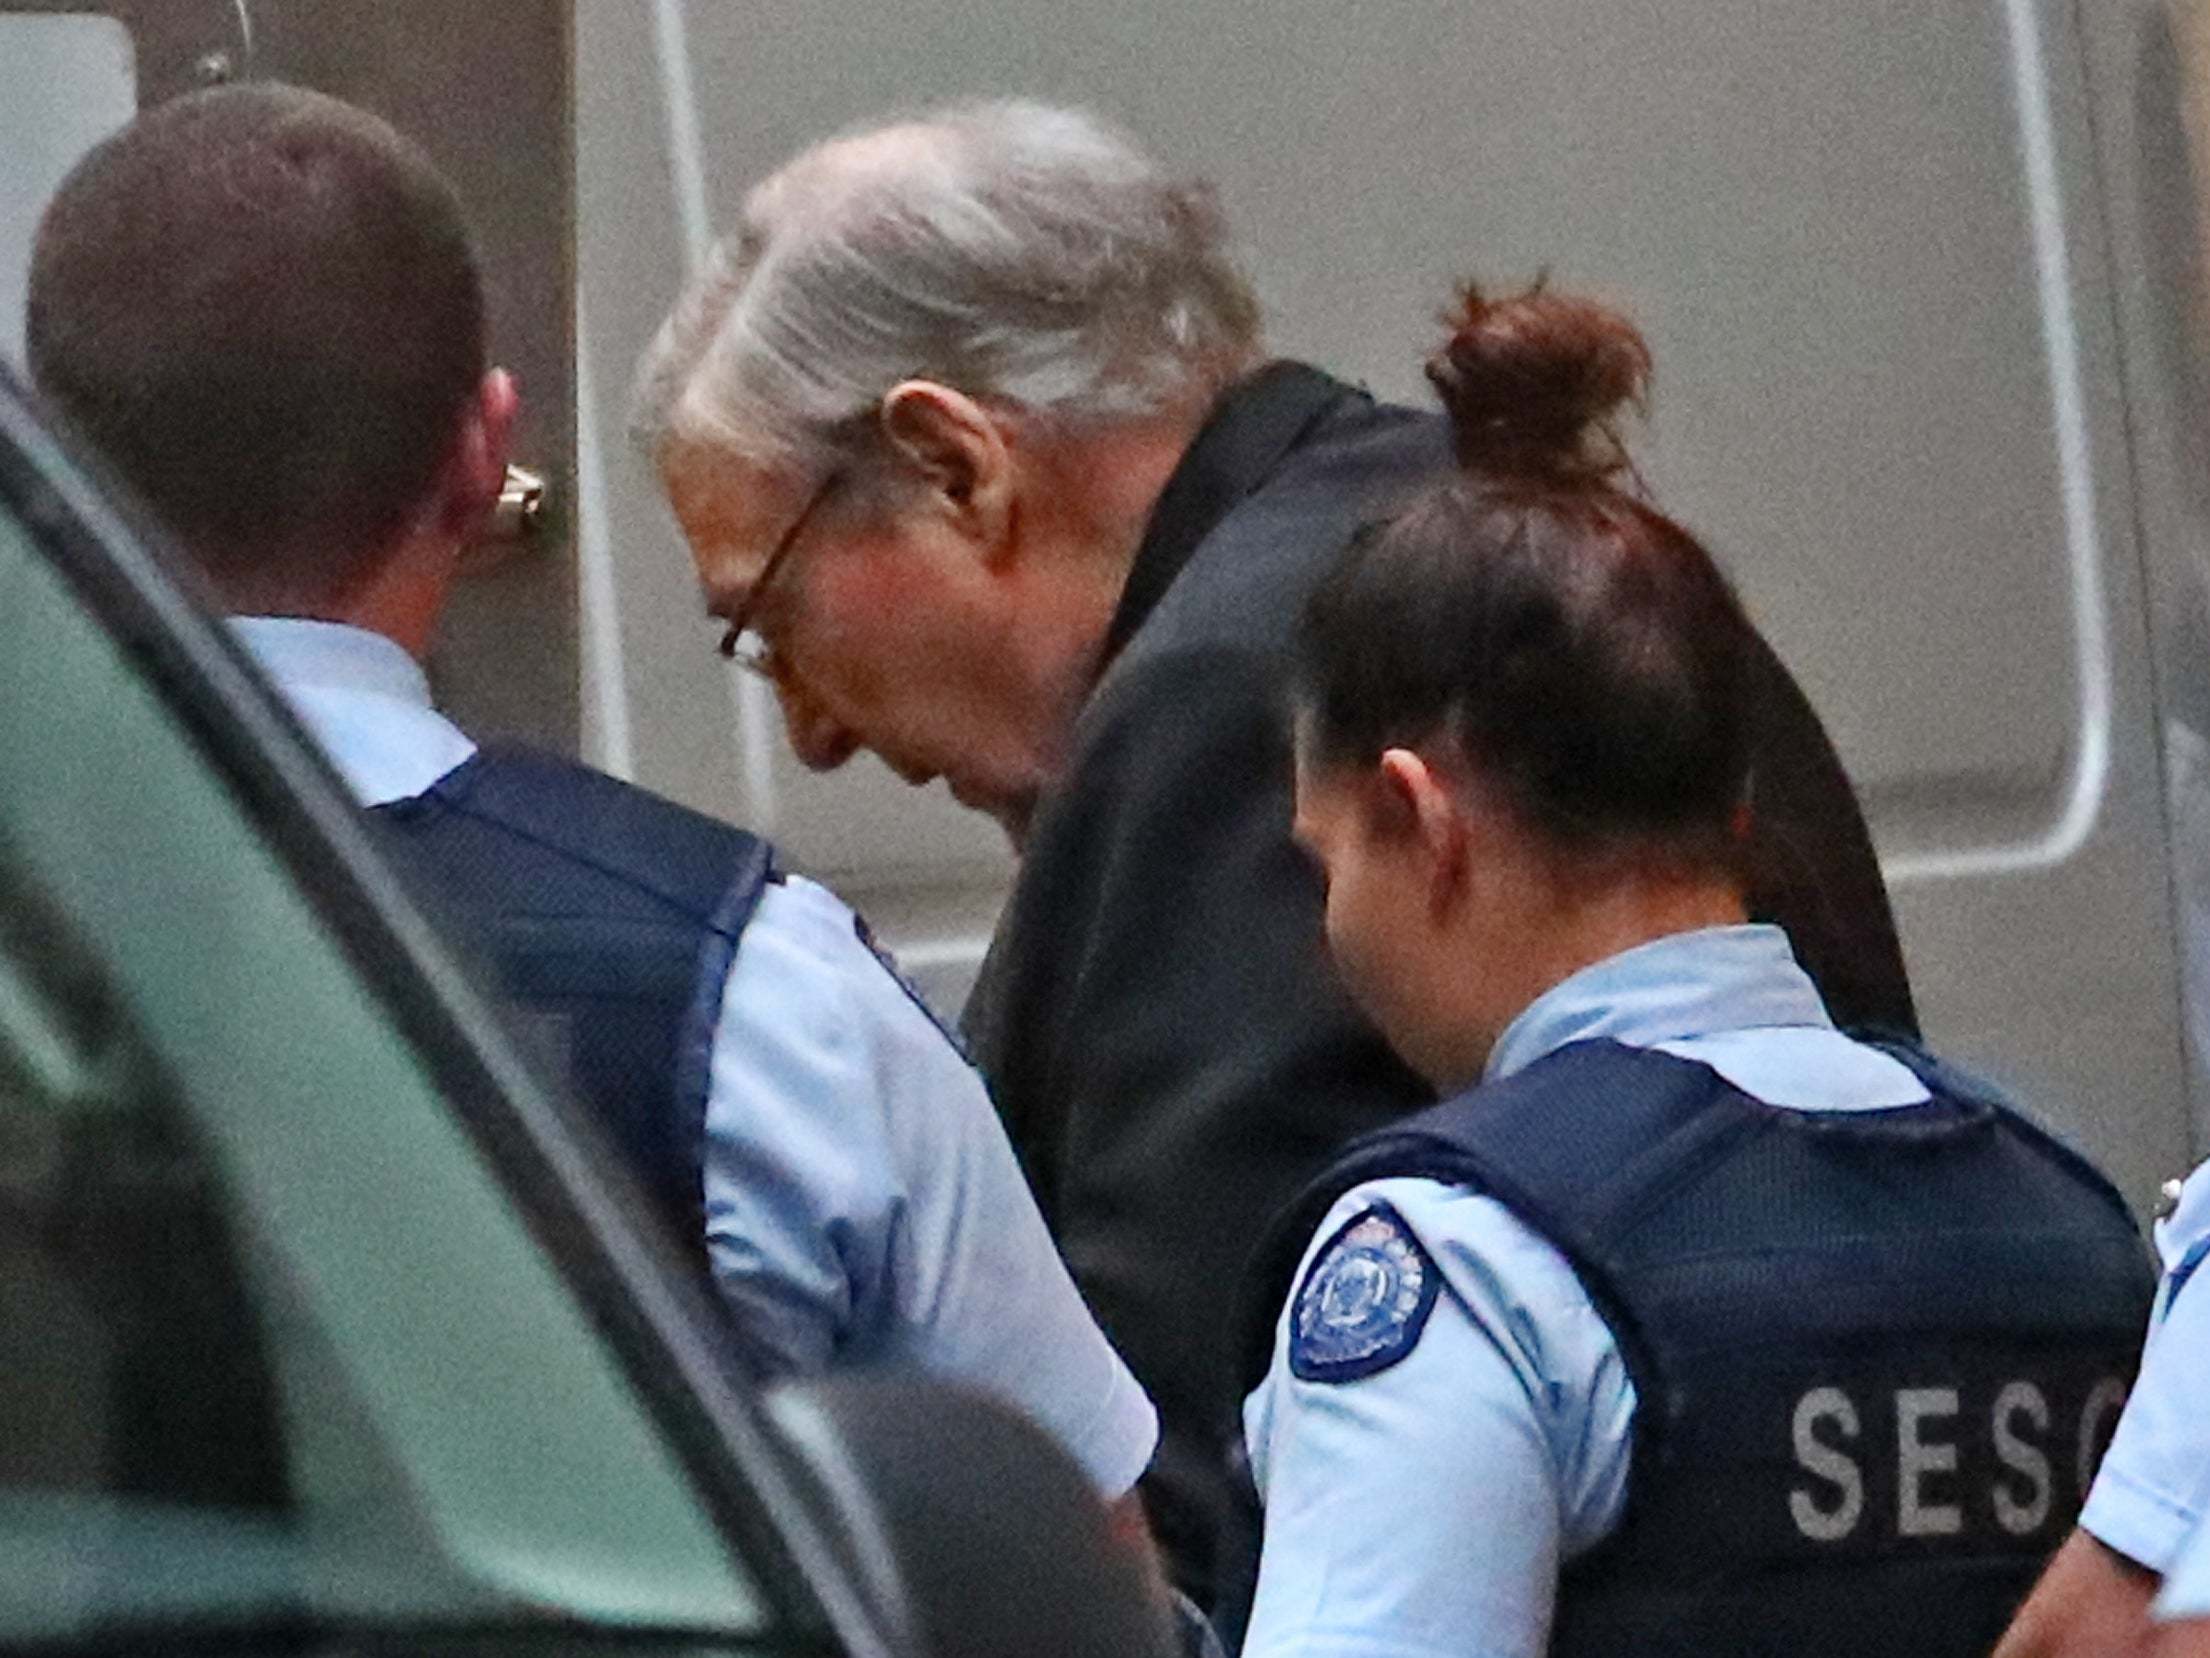 Cardinal George Pell leaves the Supreme Court of Victoria after his appeal hearing opened on Wednesday